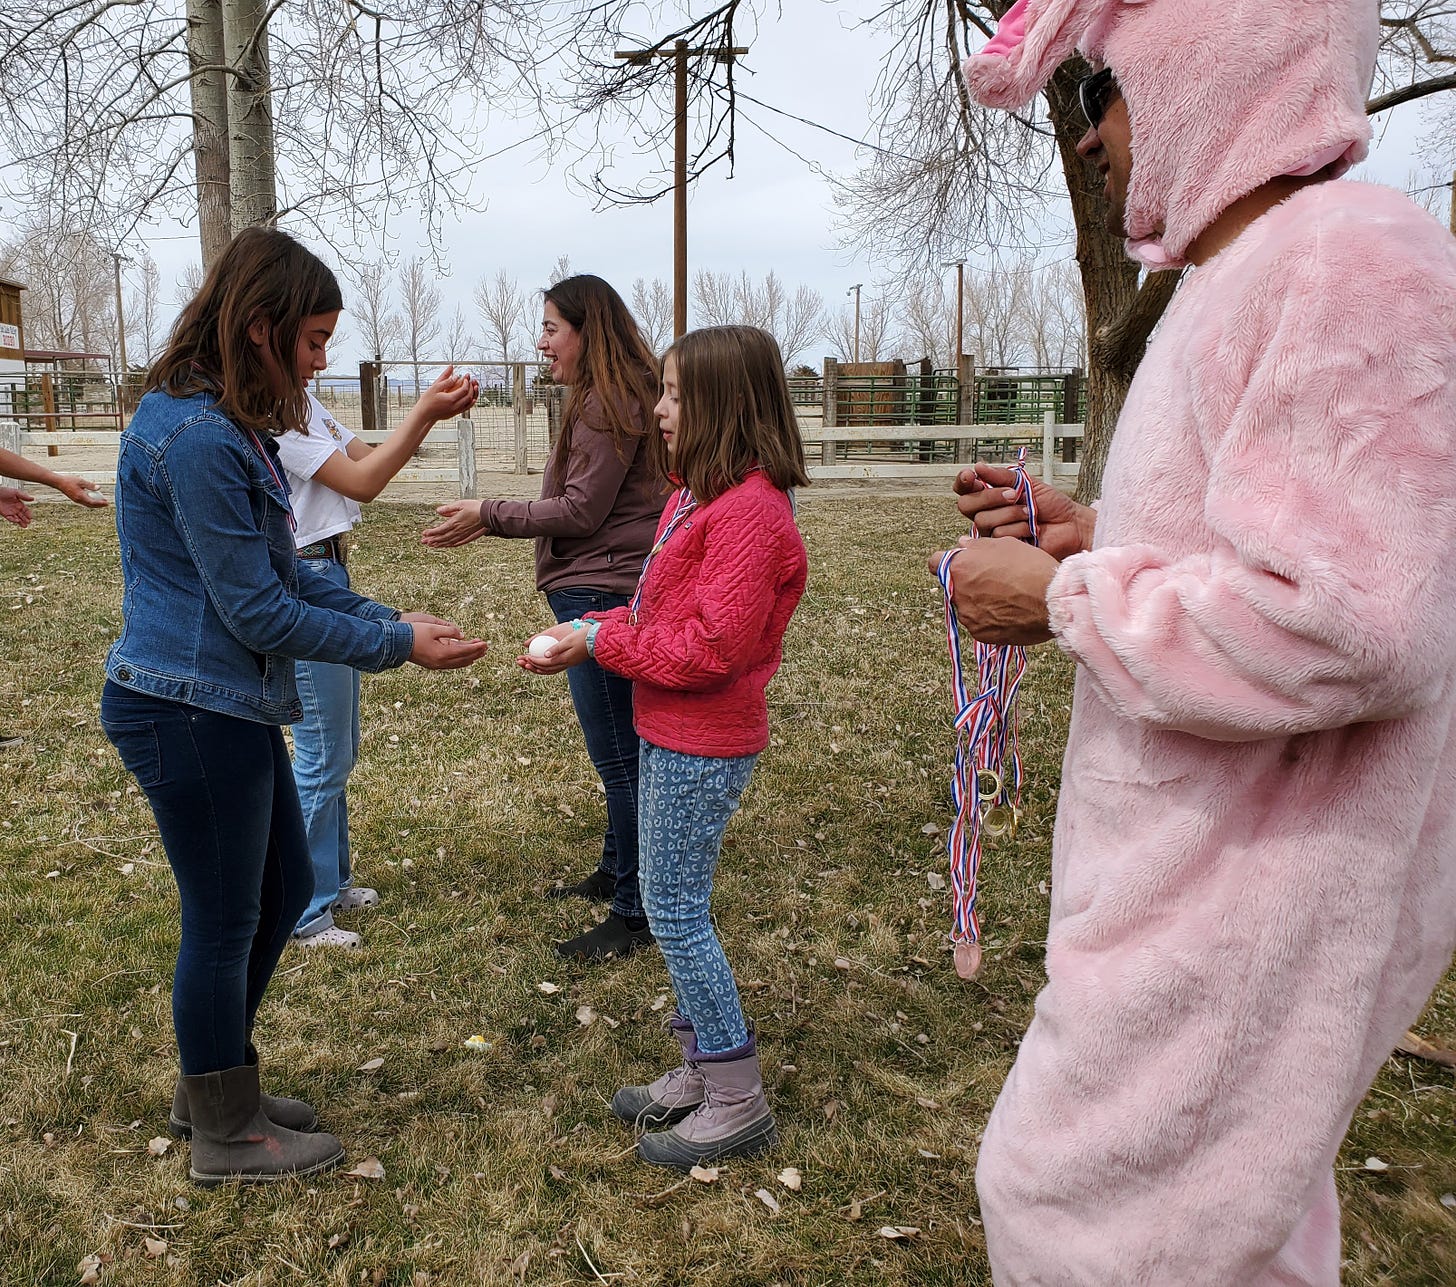 C and L tossing each other an egg. Eric looks on in a pink bunny suit.